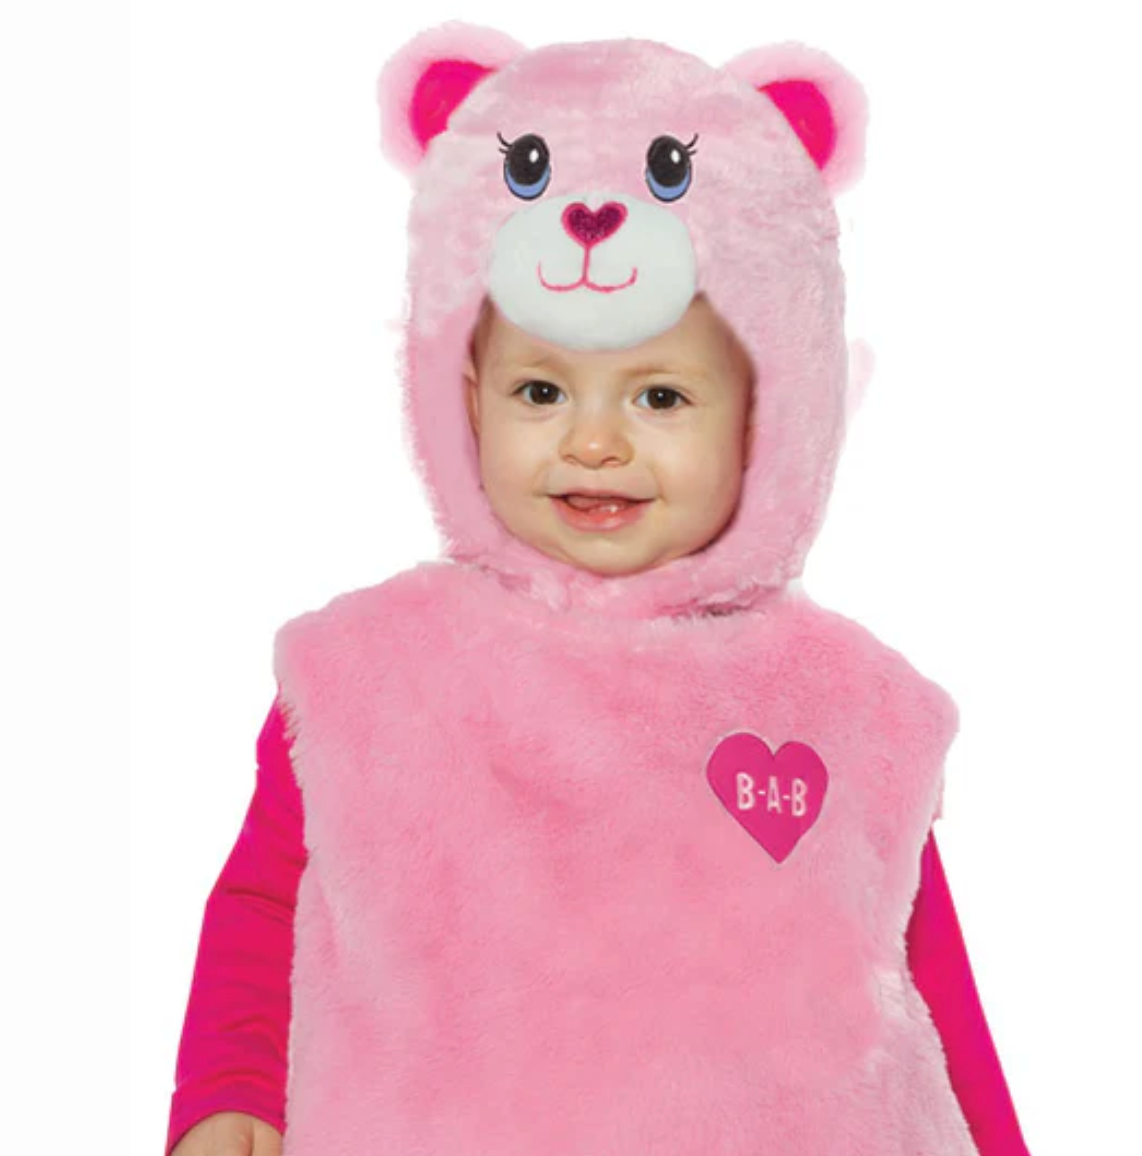 Halloween Magic: Cherishing Moments with Your Baby in Adorable Costumes